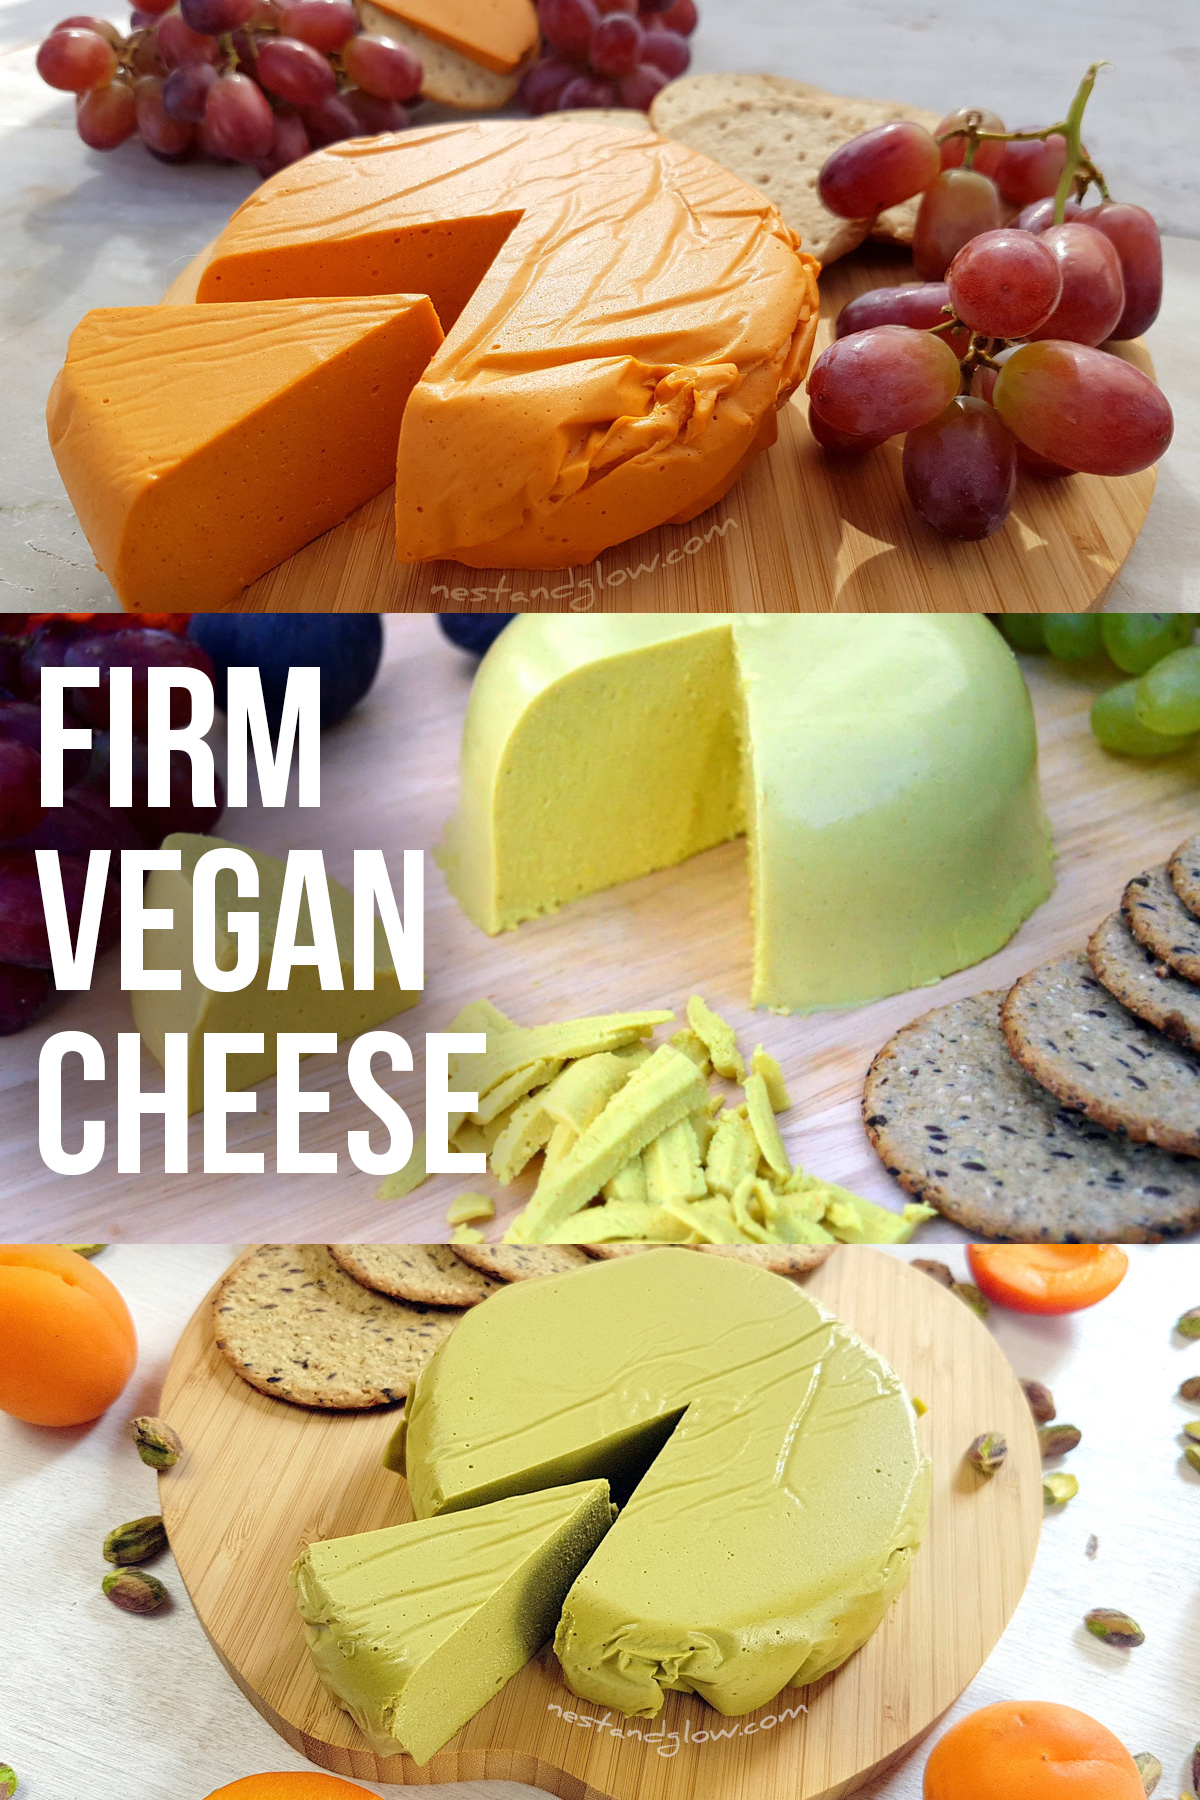 Vegan Hard Cheese Recipes Sliced Or Grated For Pizza And Vegan Cheddar 